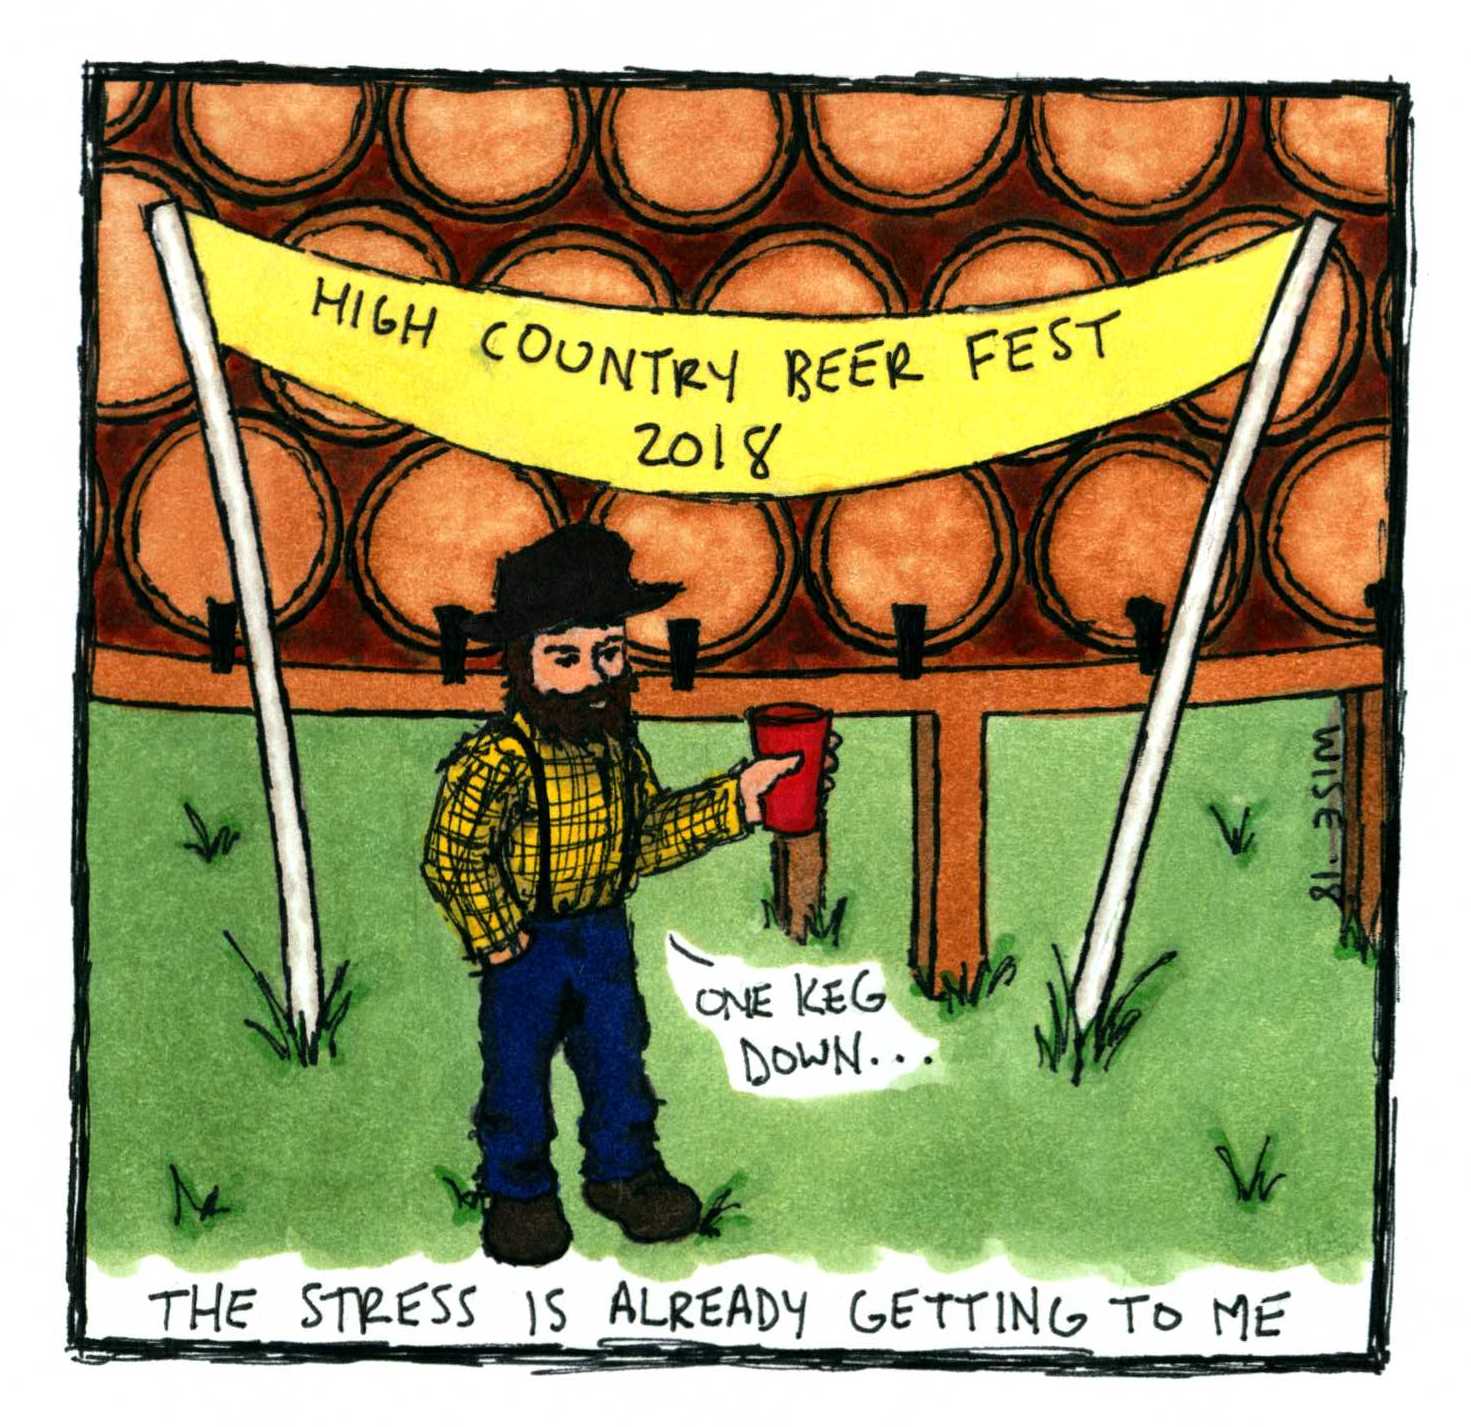 High+Country+Beer+Fest+brews+up